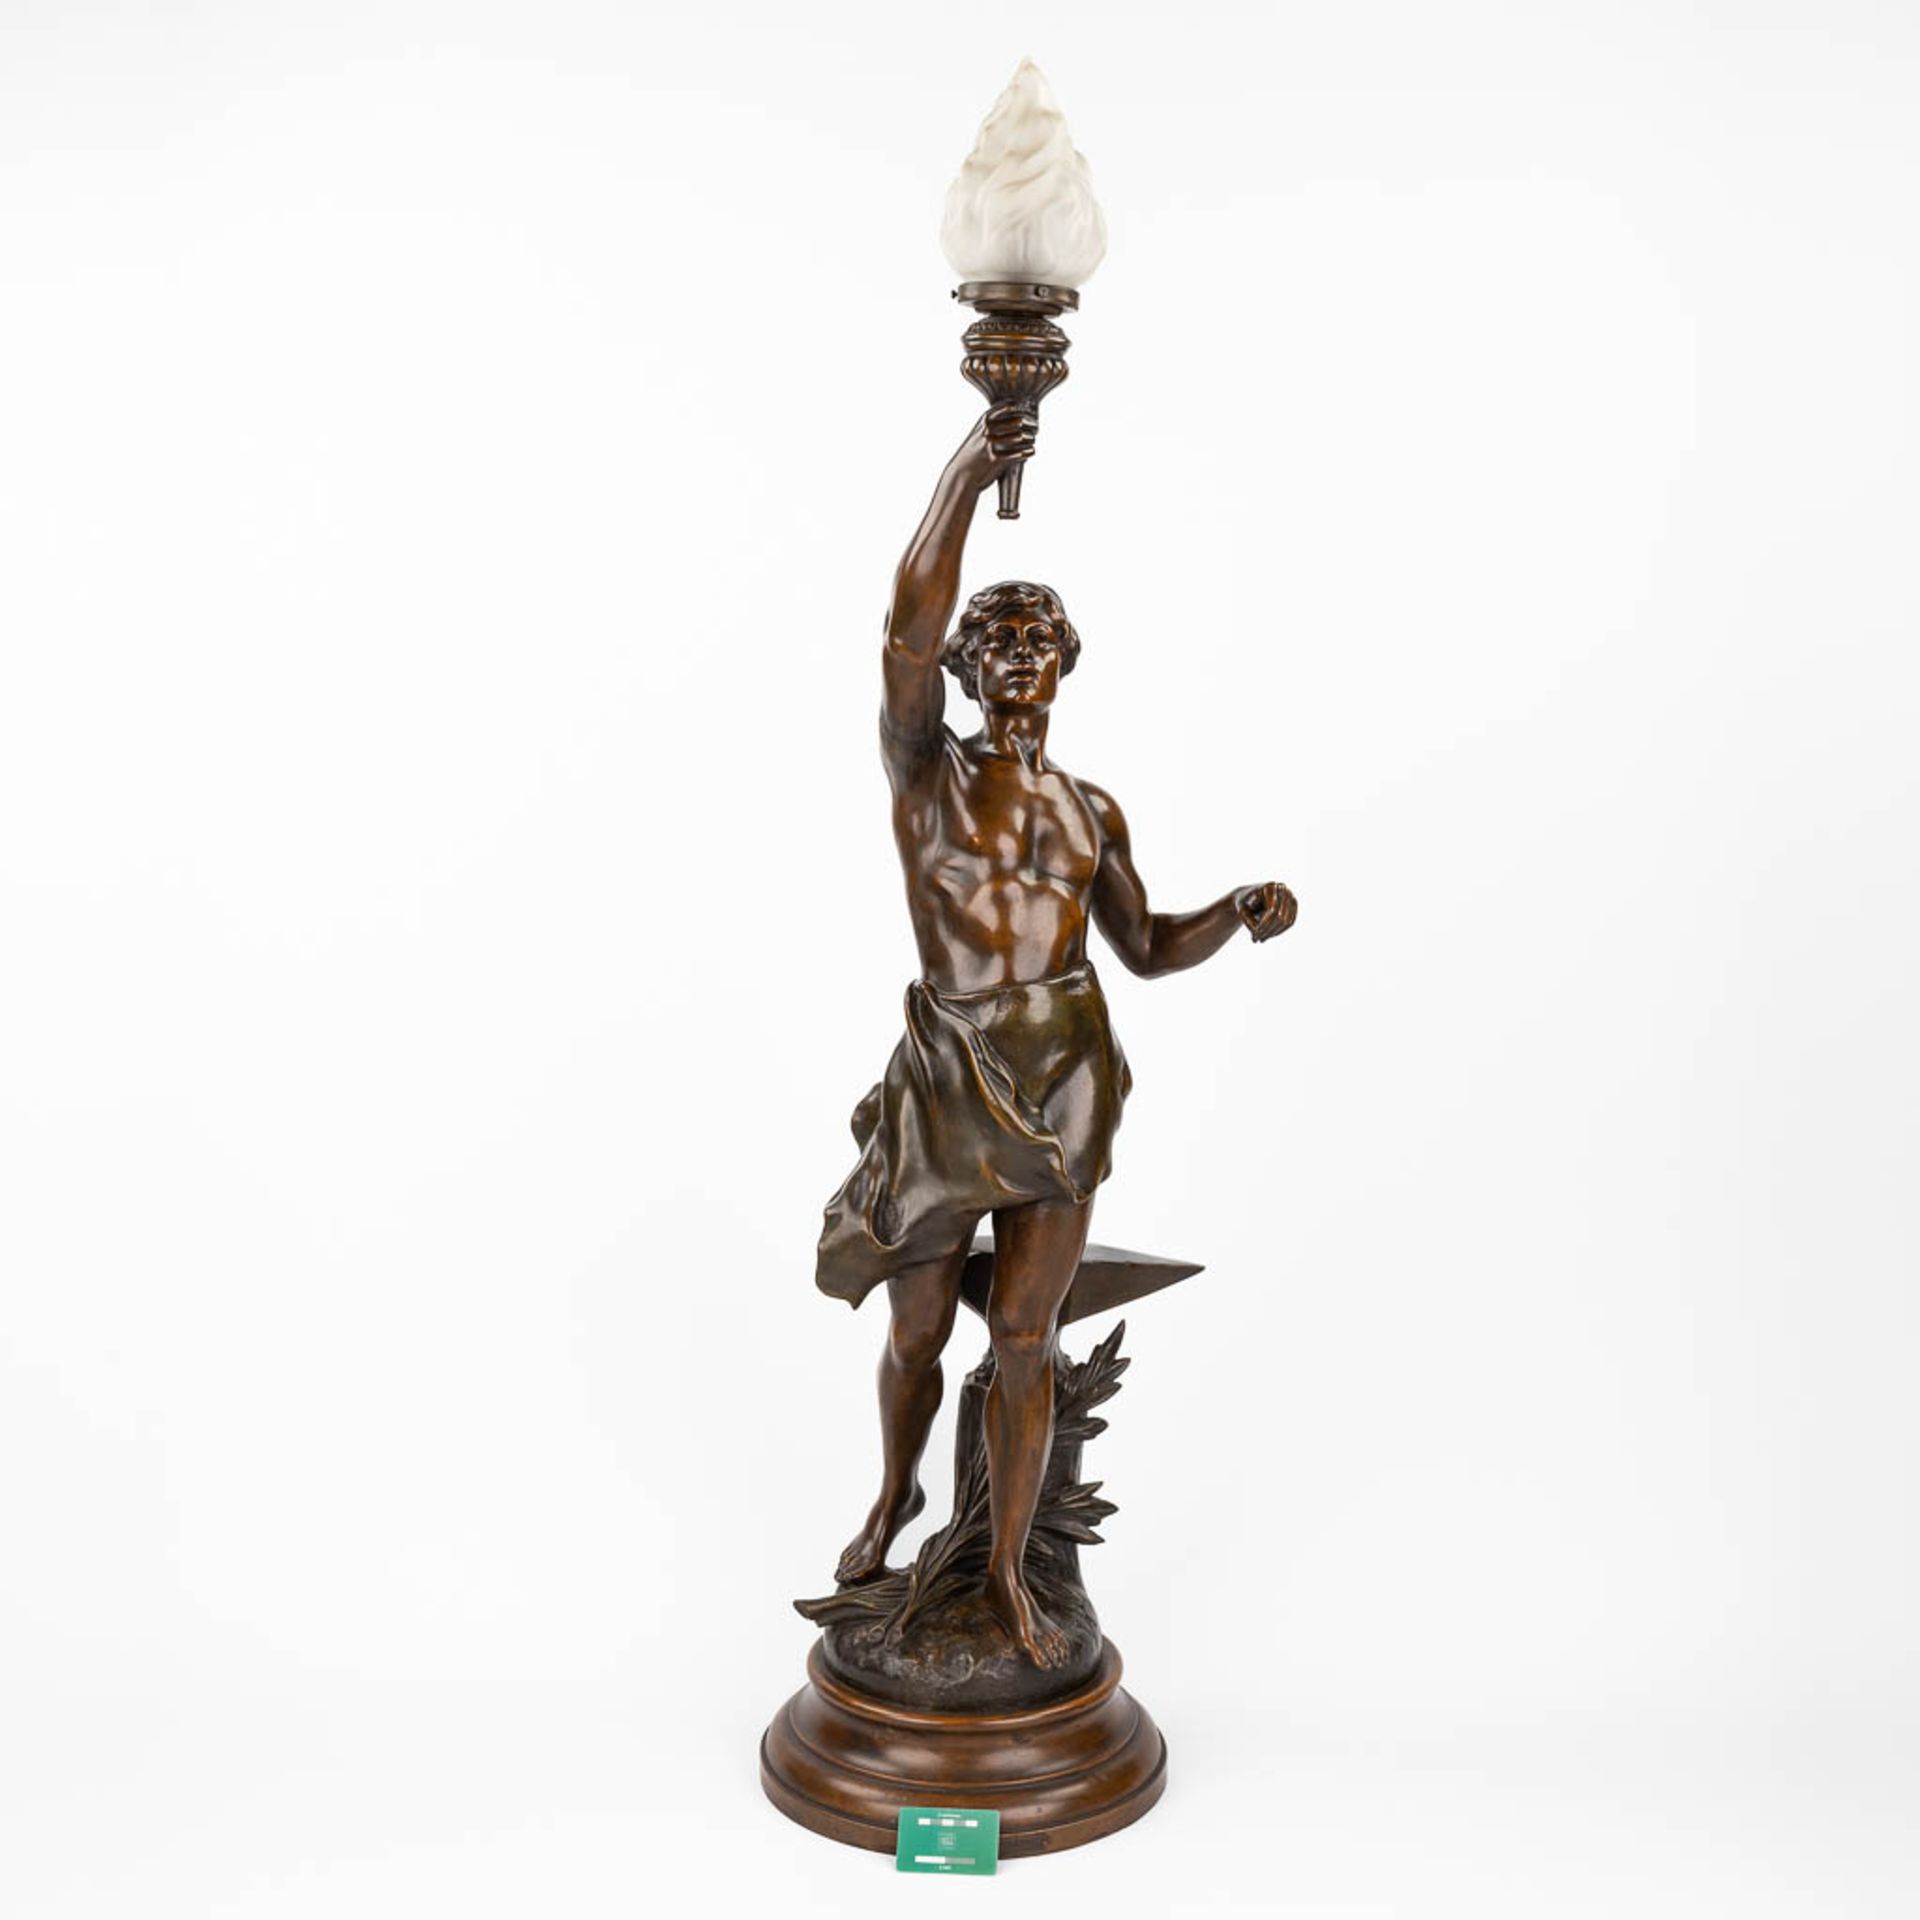 Charles Théodore PERRON (1862-1934) 'Le Travail' A lamp, patinated spelter. Circa 1900. (H:147 x D:3 - Image 2 of 10